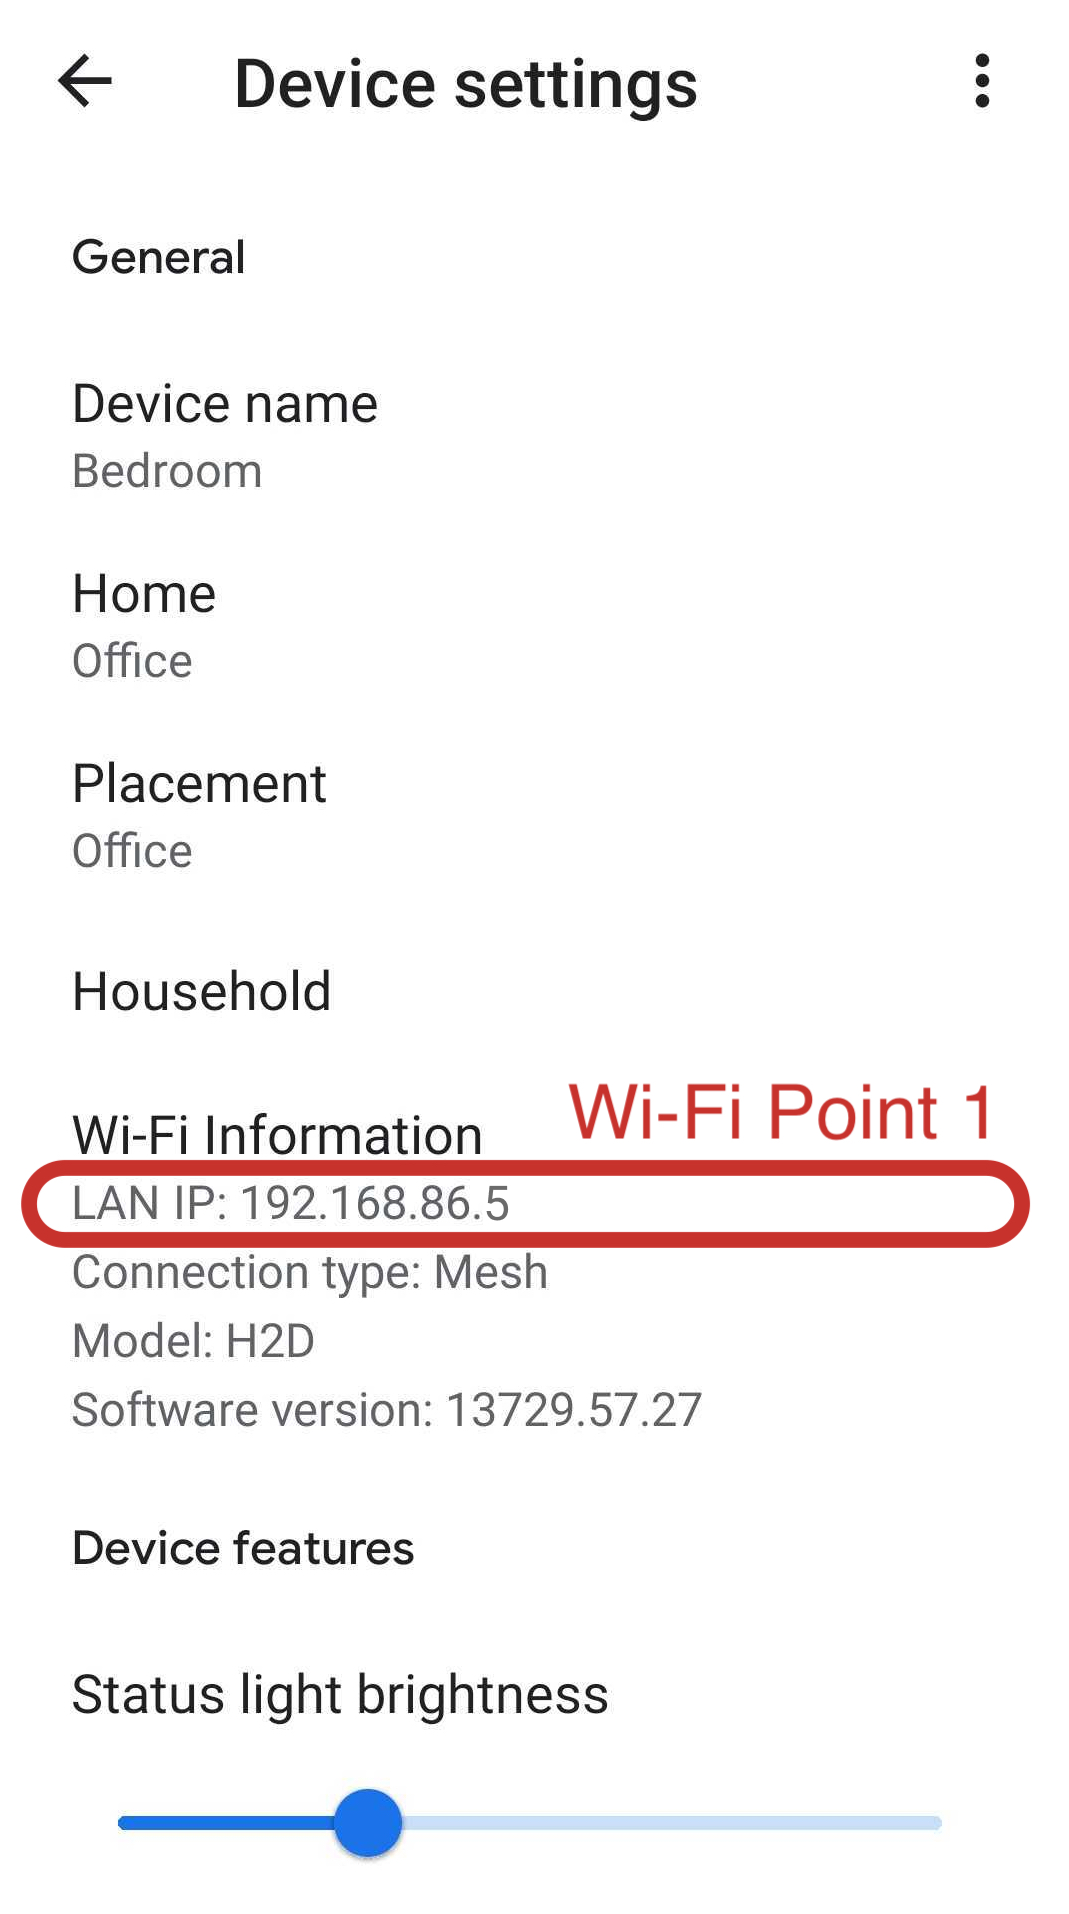 Reboot WiFi satellites, wait for the mesh network to fully boot up, and ensure their IP addresses are within the DHCP range